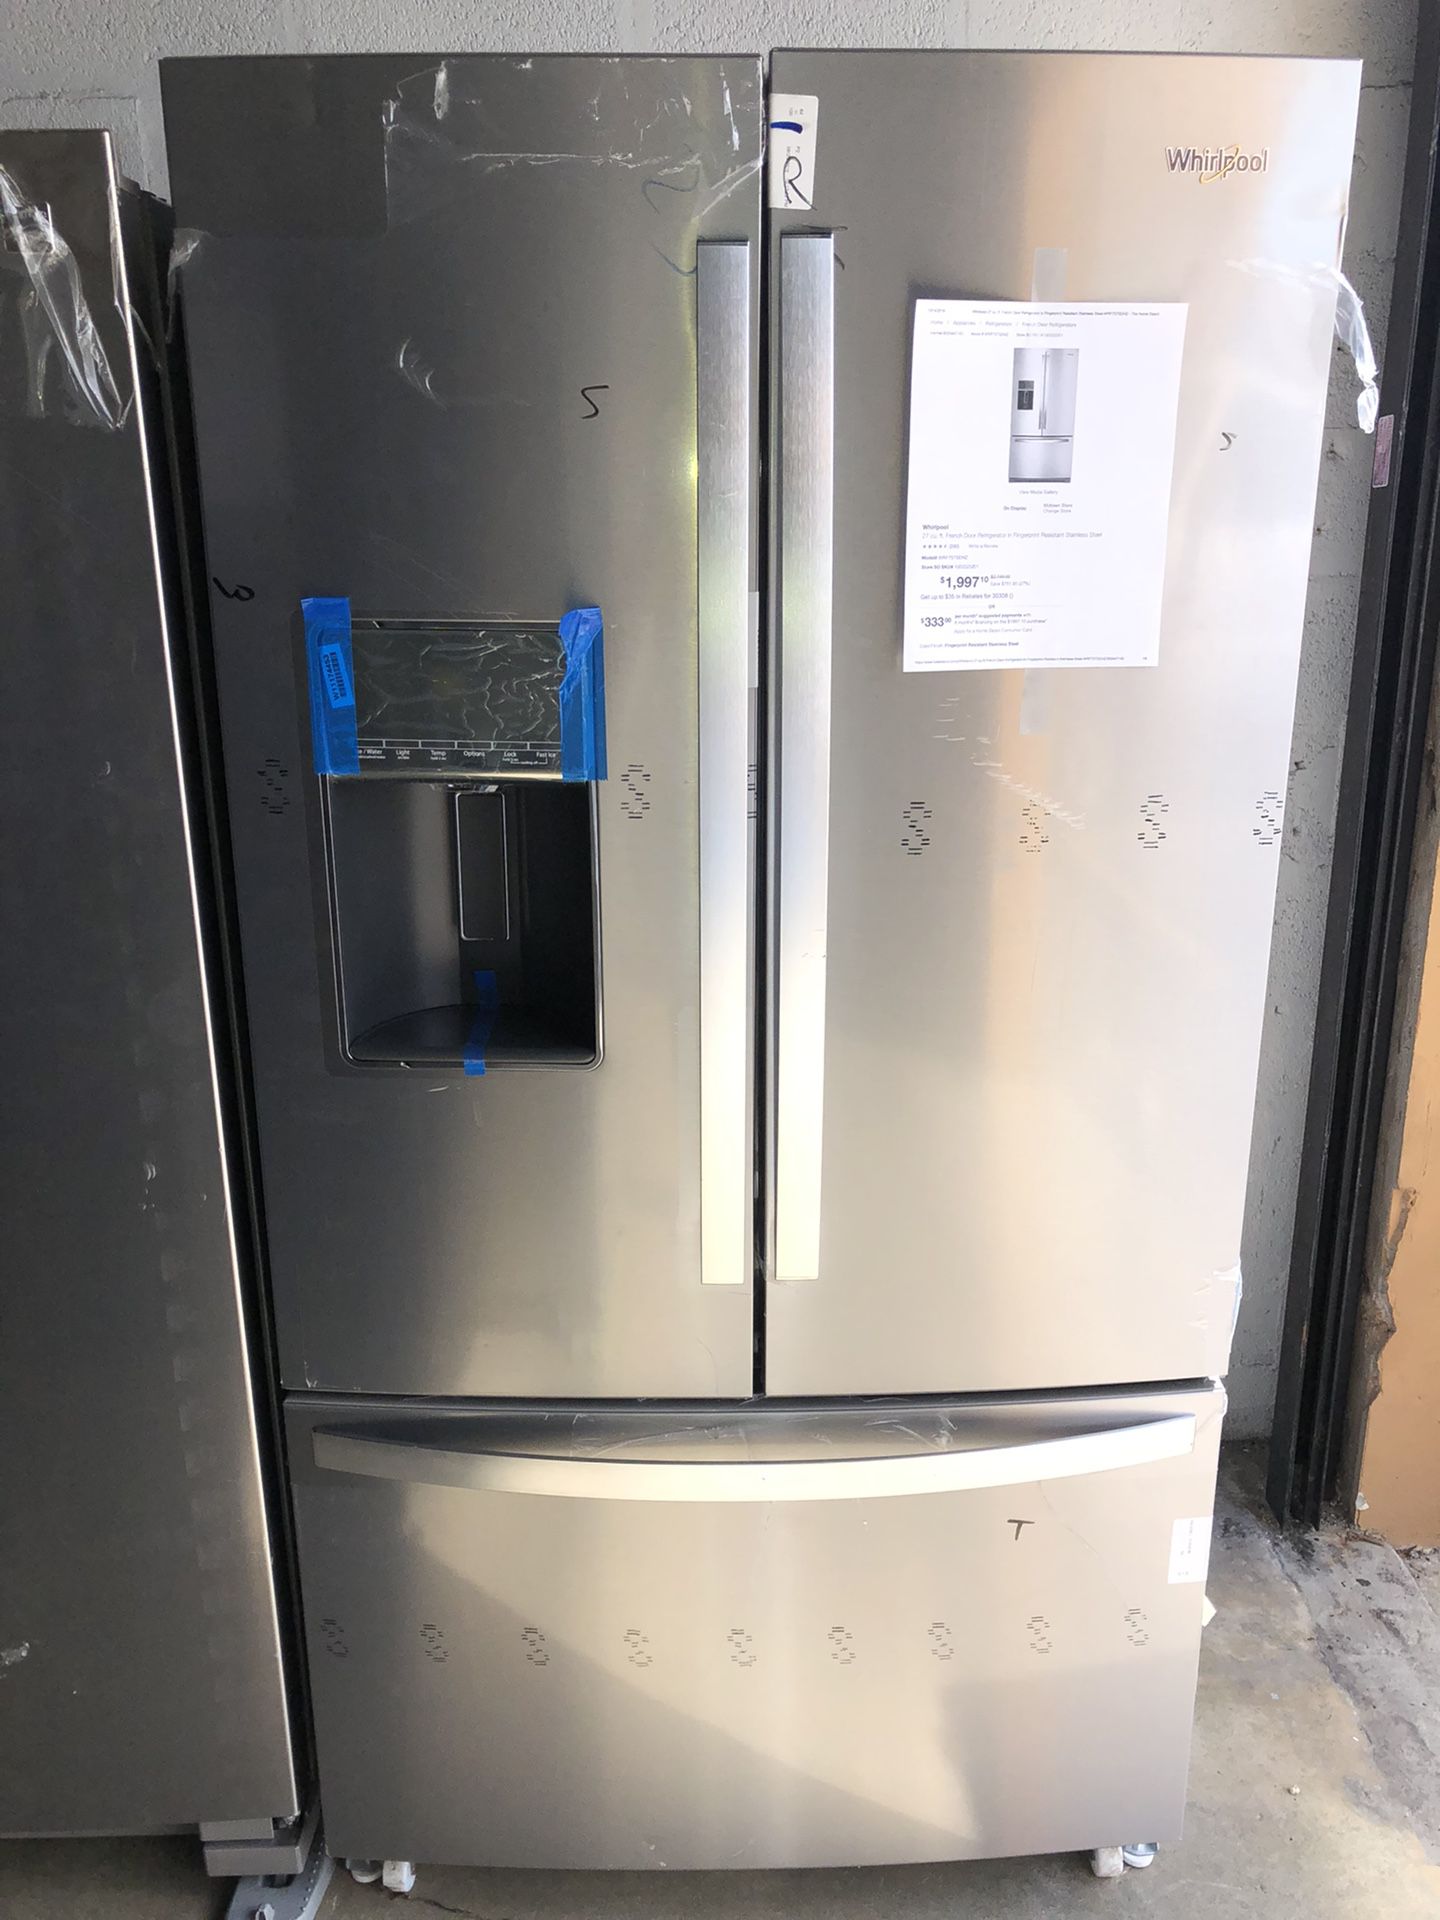 WHIRLPOOL REFRIGERATOR 36” NEW WARRANTY AND DELIVERY